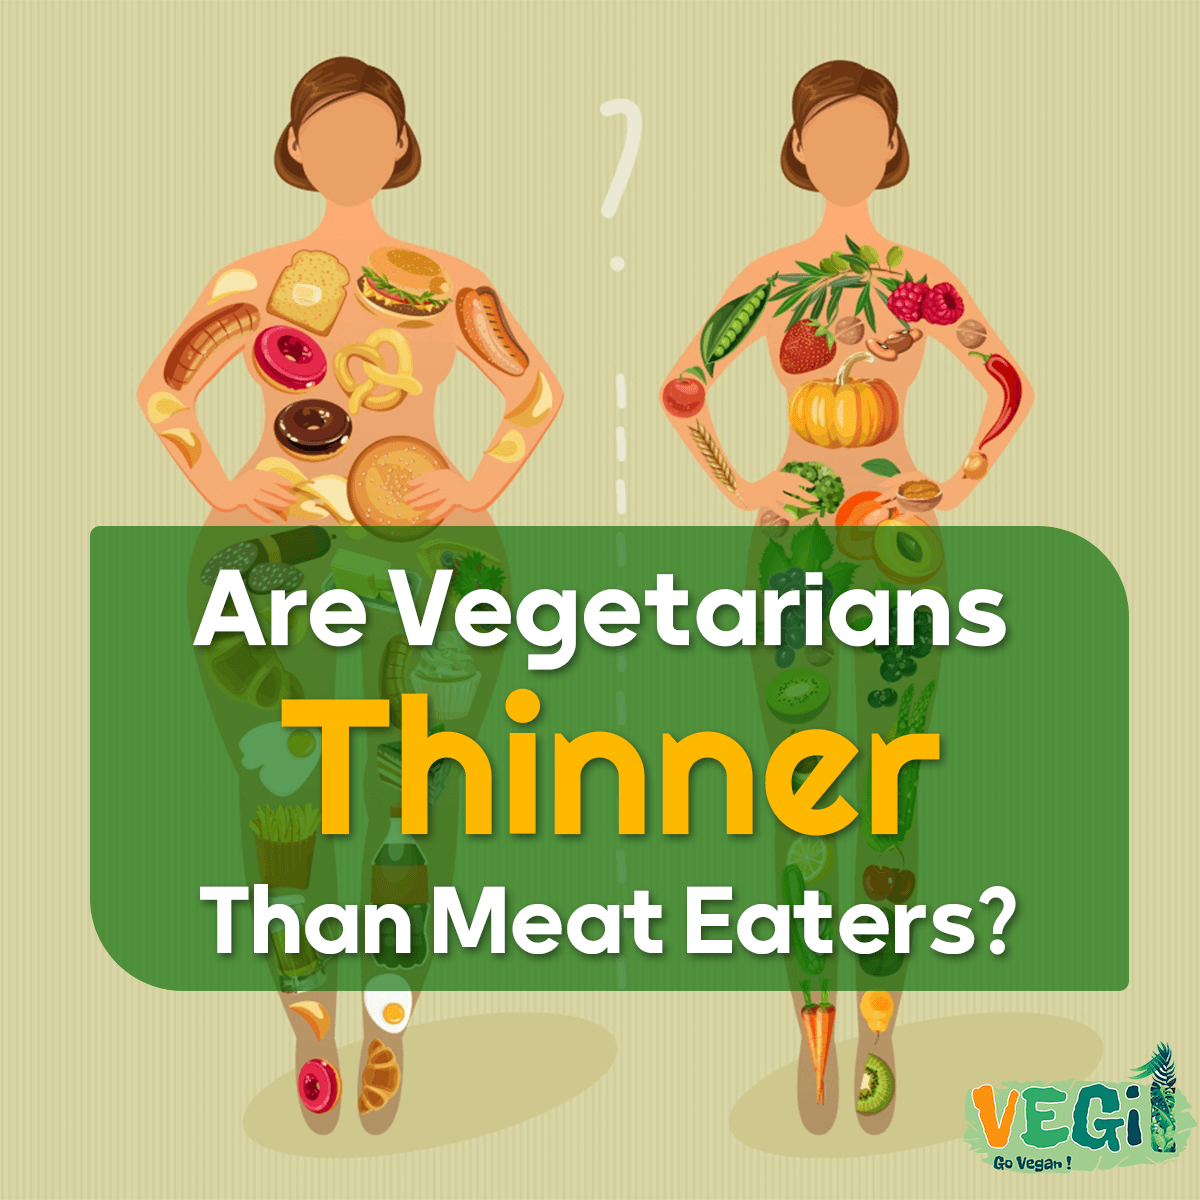 Are Vegetarians Thinner Than Meat Eaters